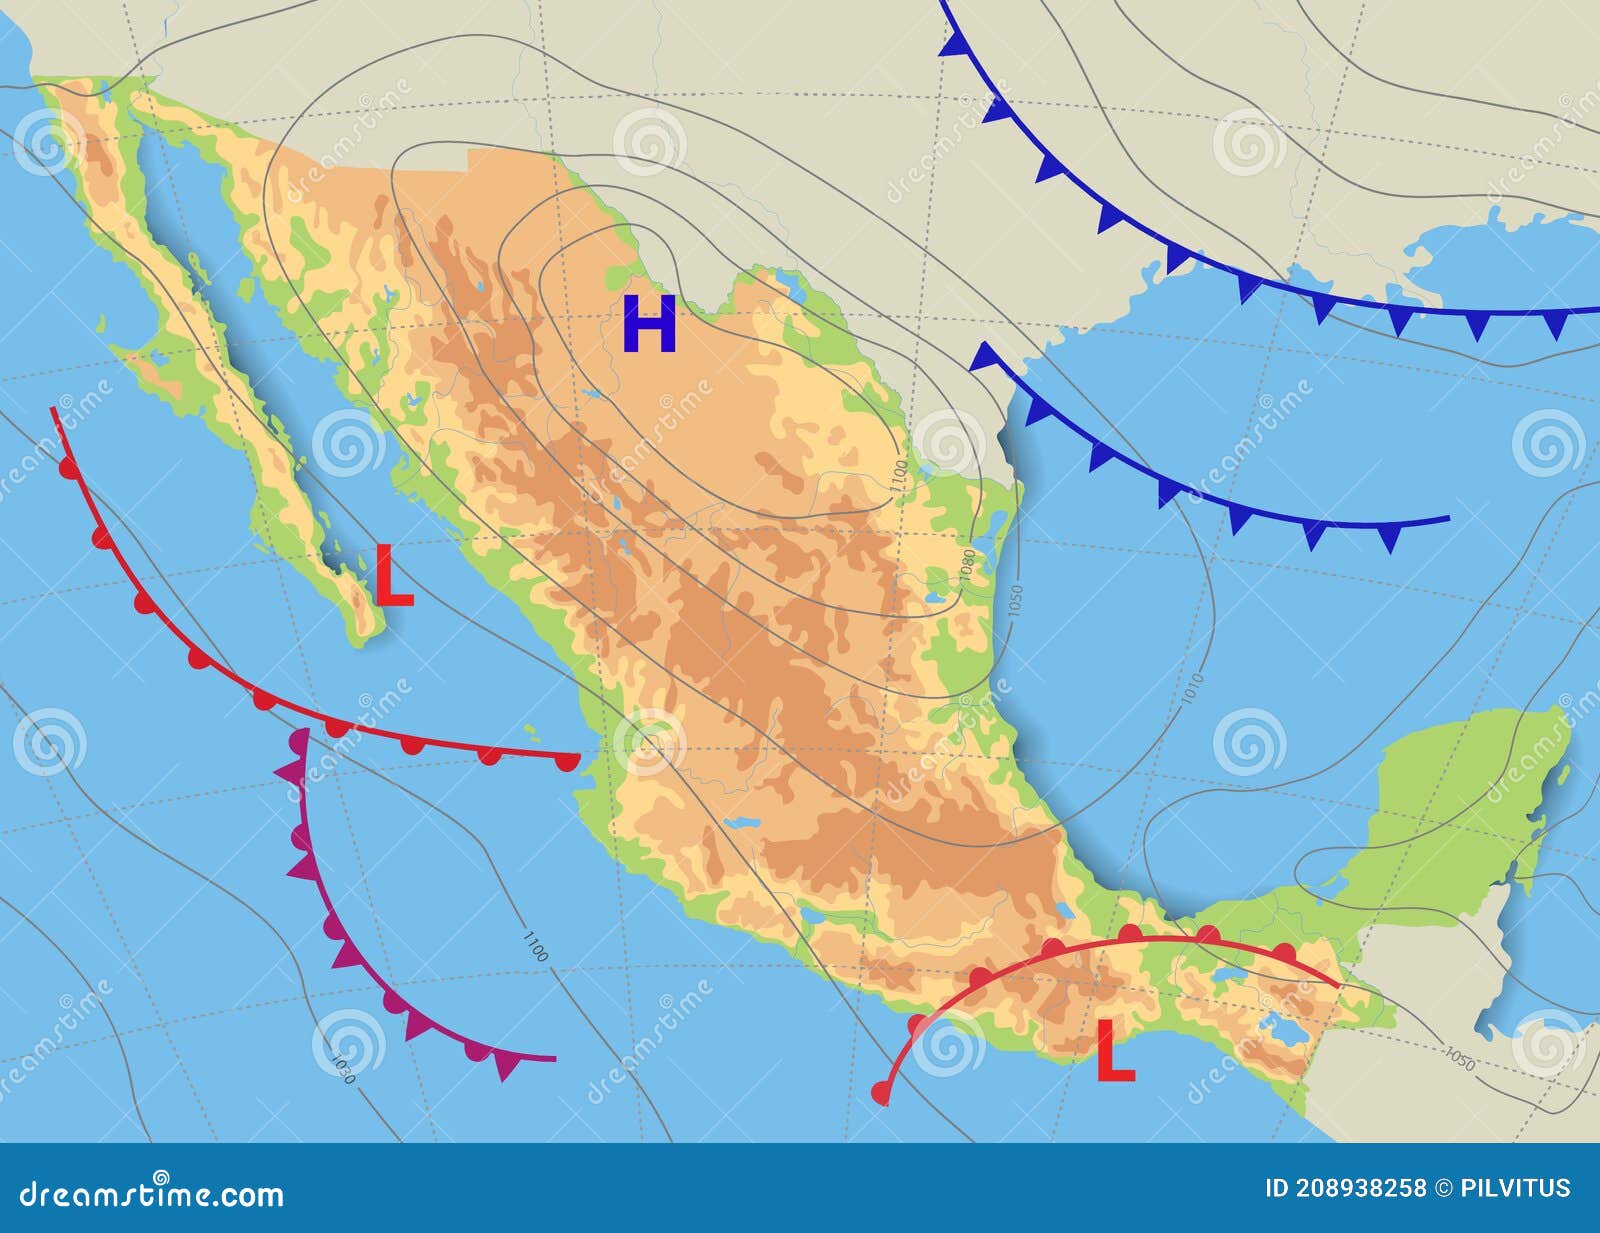 Physical and Topography Map of Mexico. Realistic Weather Map of the